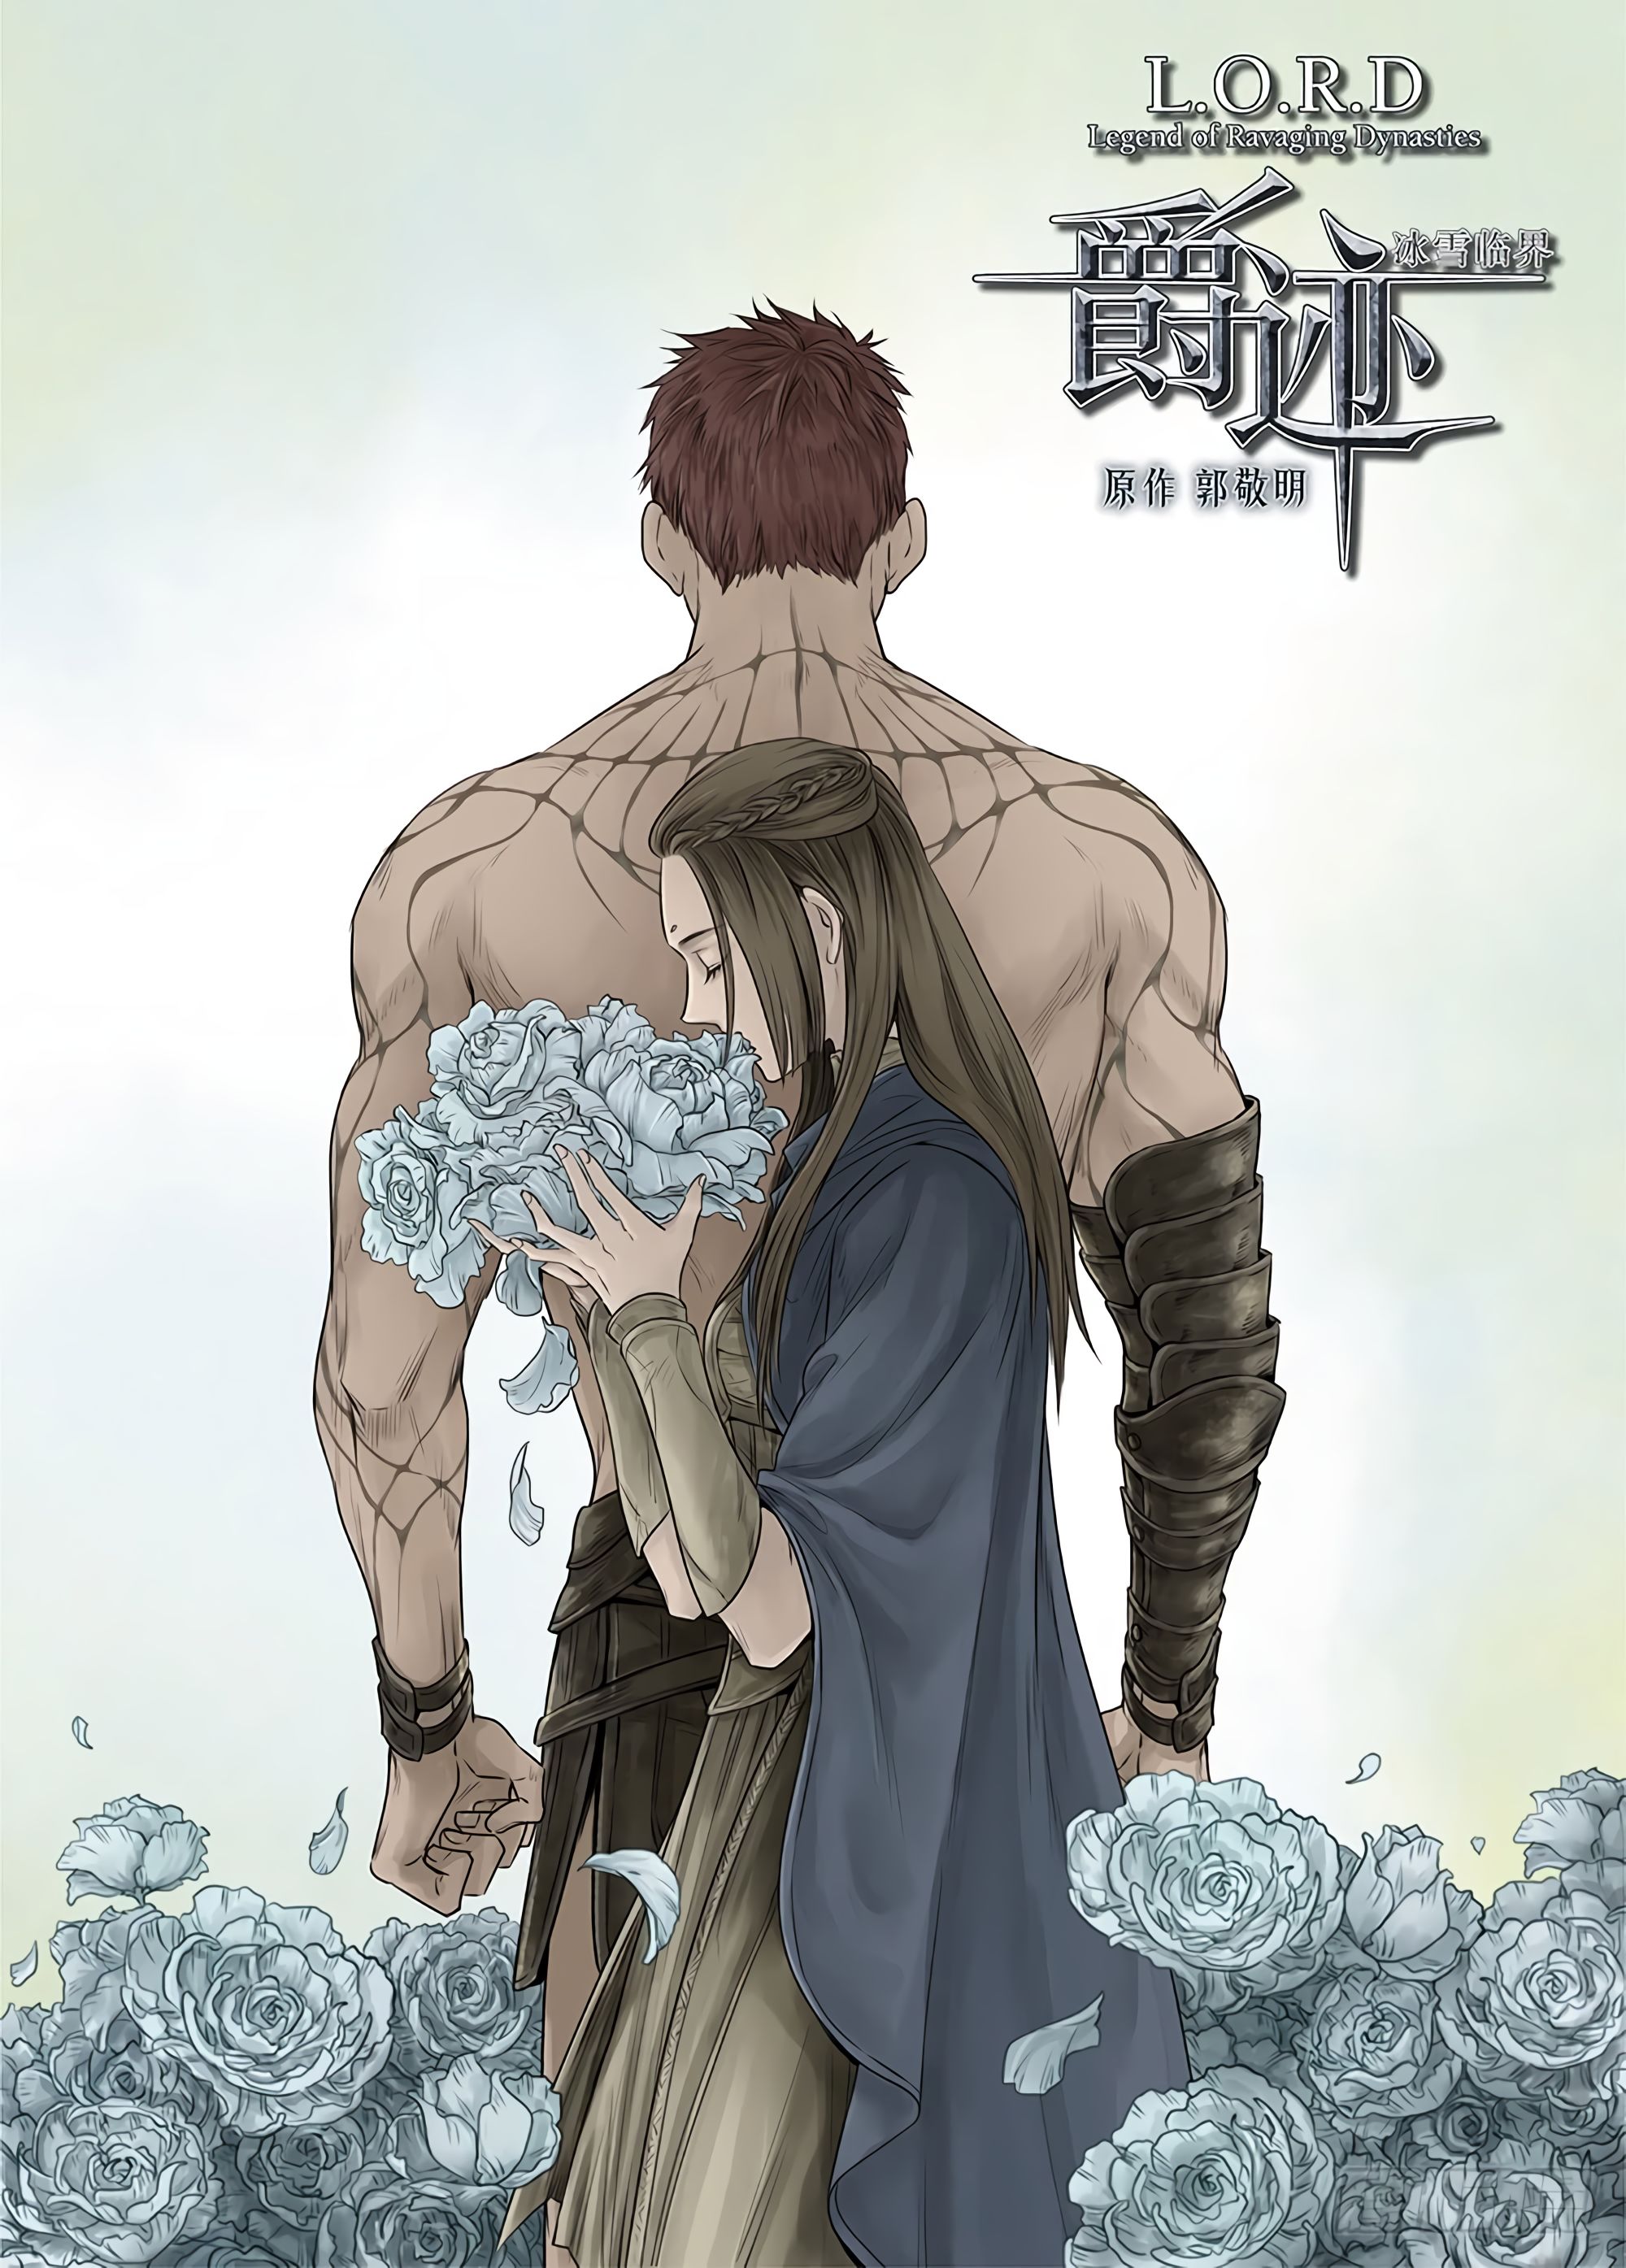 L.O.R.D: Legend of Ravaging Dynasties - chapter 25.5 - #2